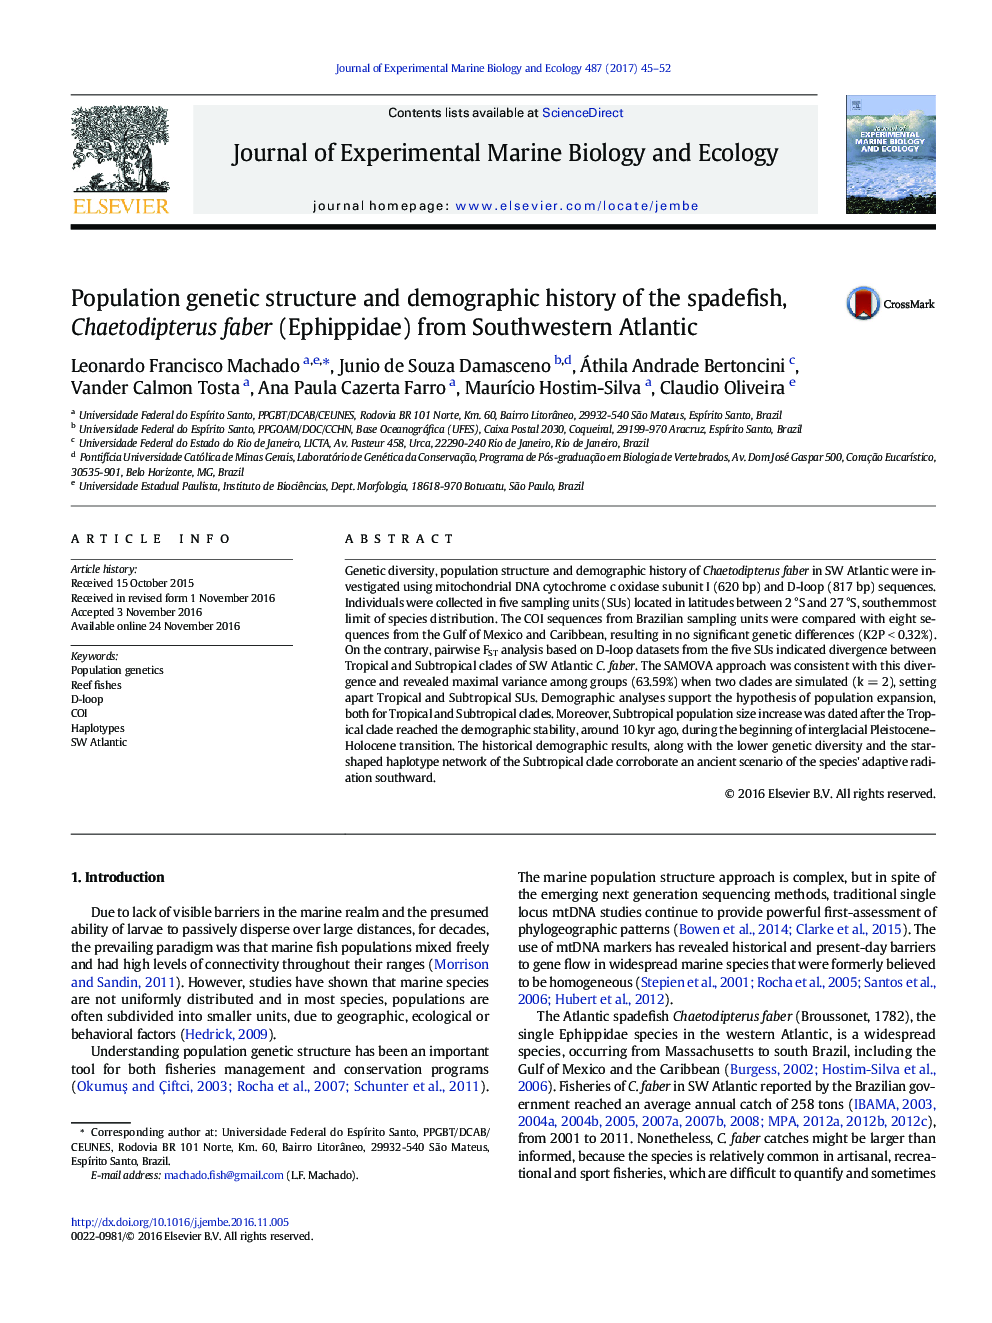 Population genetic structure and demographic history of the spadefish, Chaetodipterus faber (Ephippidae) from Southwestern Atlantic